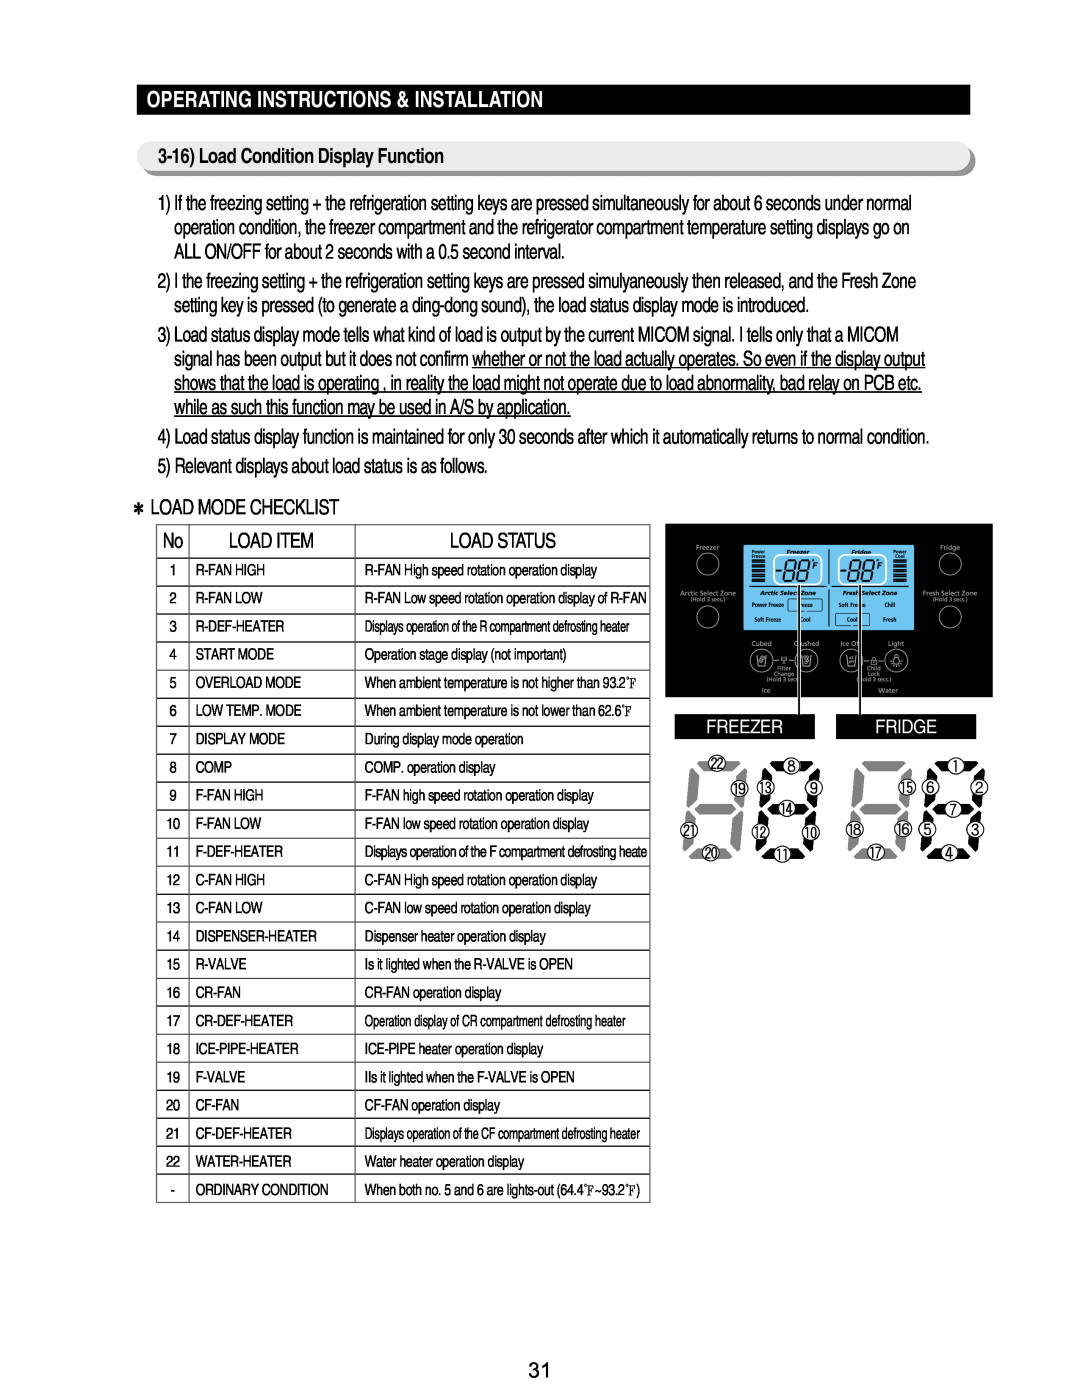 Samsung RM255BASB Load Condition Display Function, Operating Instructions & Installation, Load Mode Checklist, Load Item 